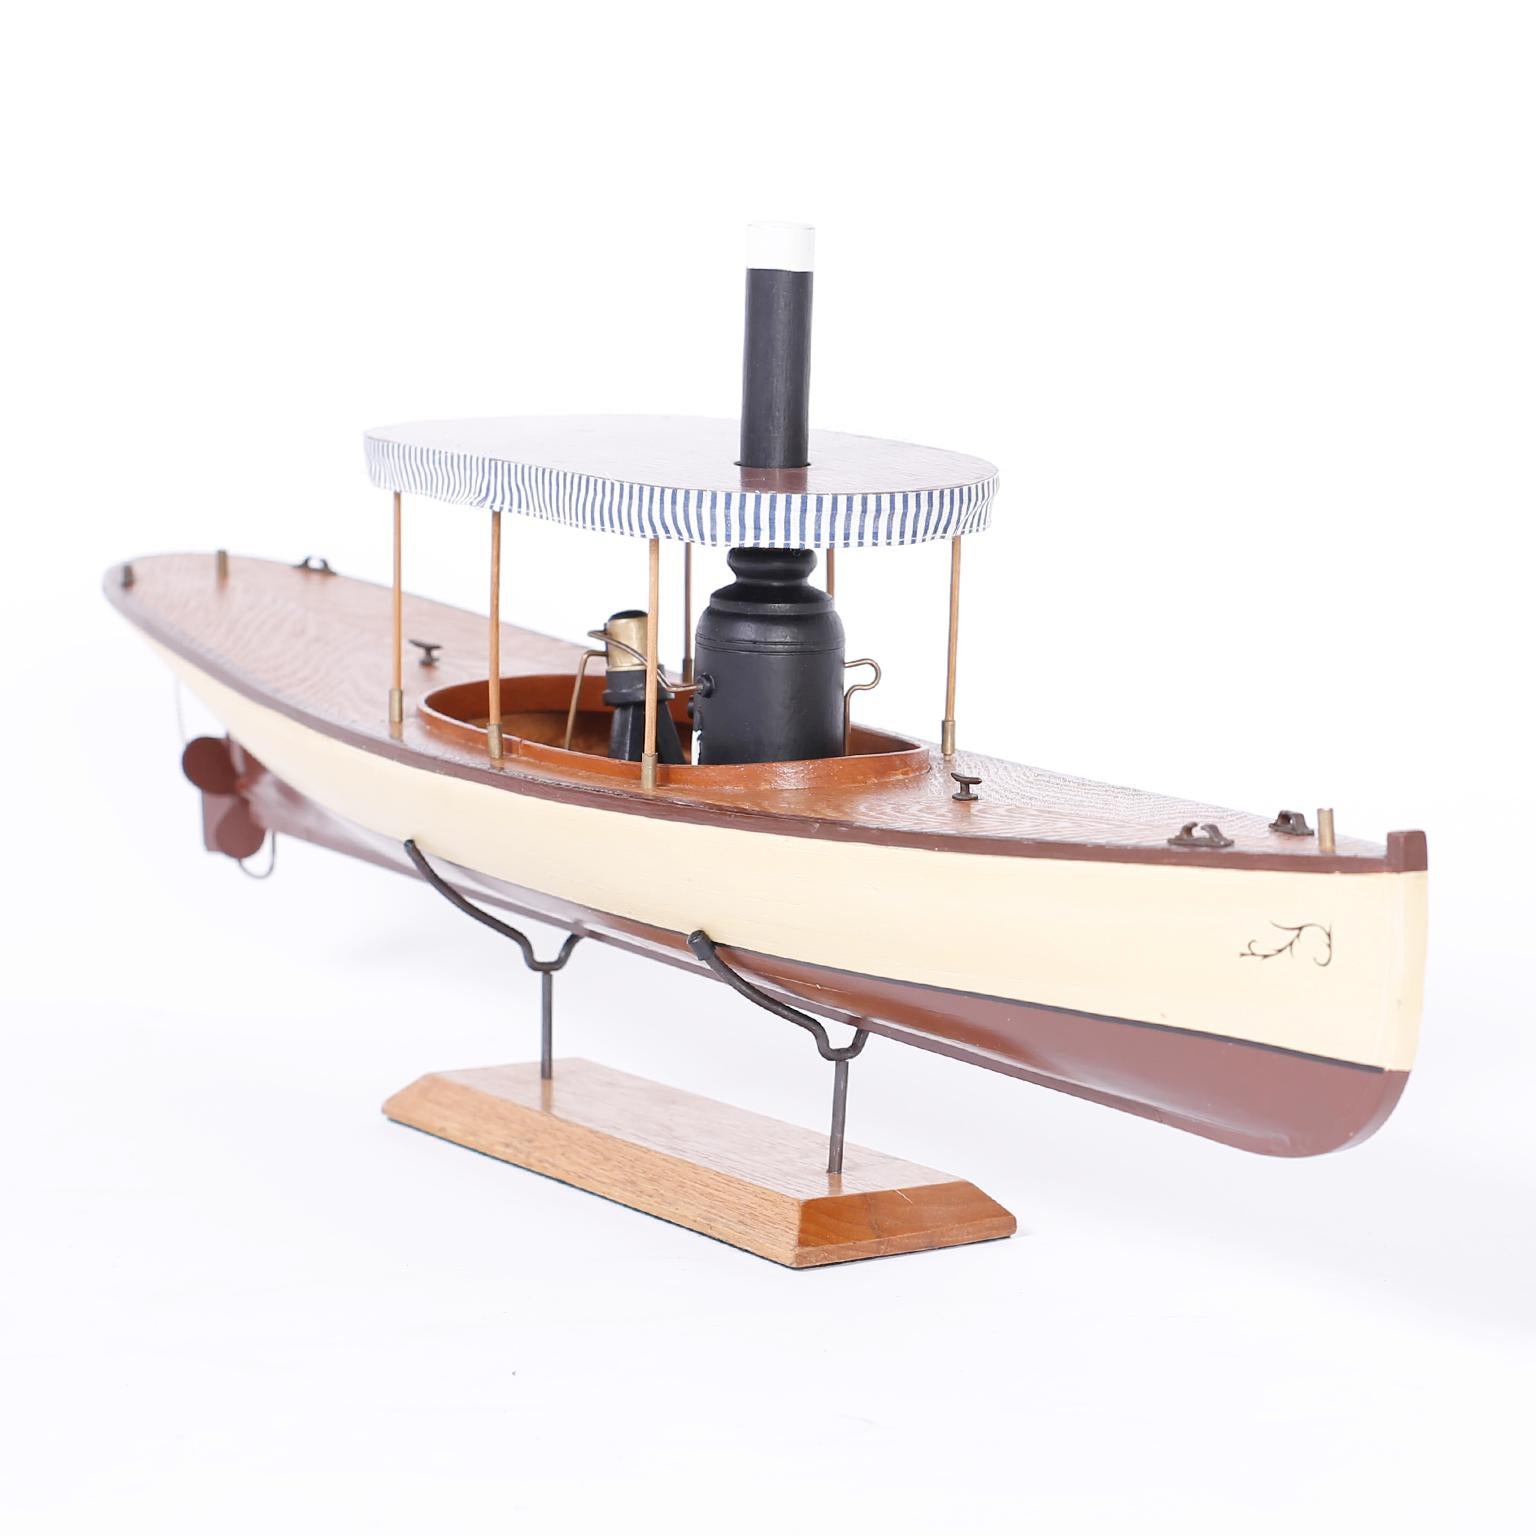 American Model of a Steam Powered Boat or Launch